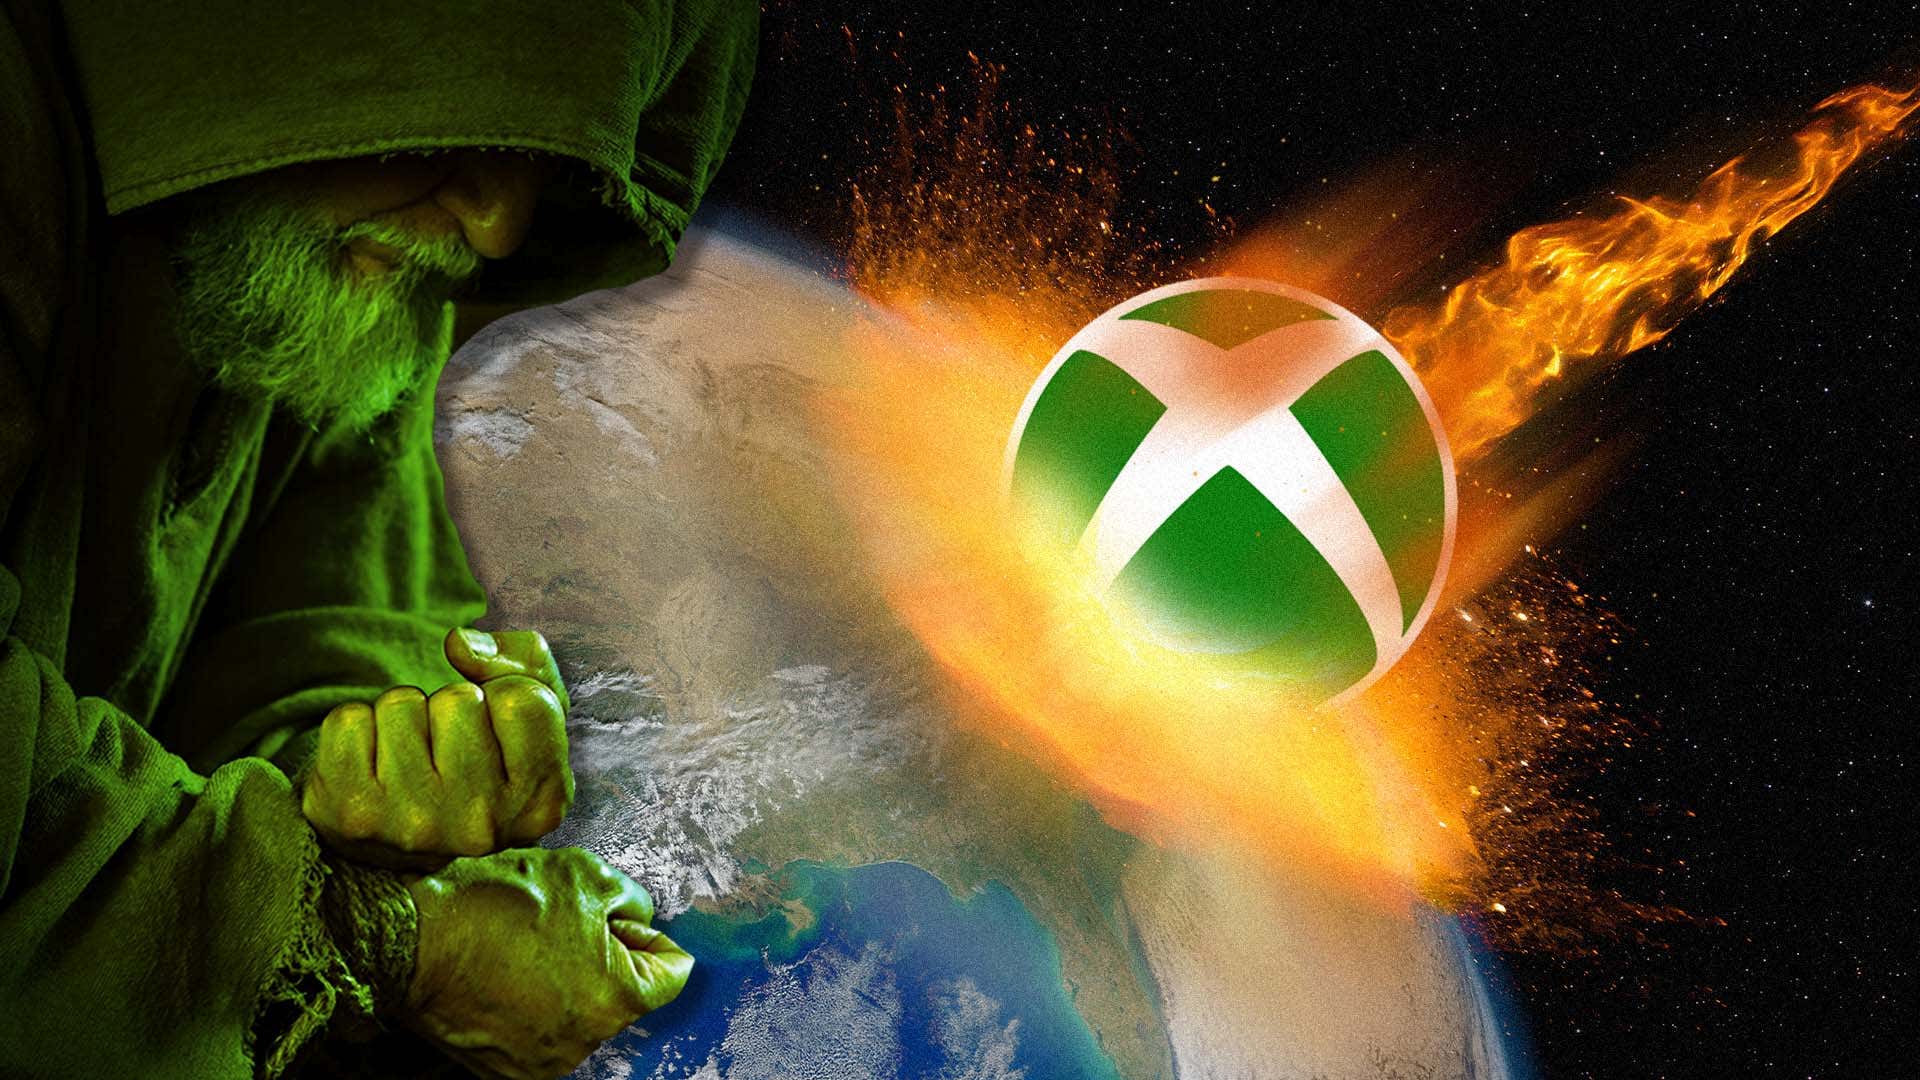 One image shows a monk praying as a large Xbox logo falls to the ground. 